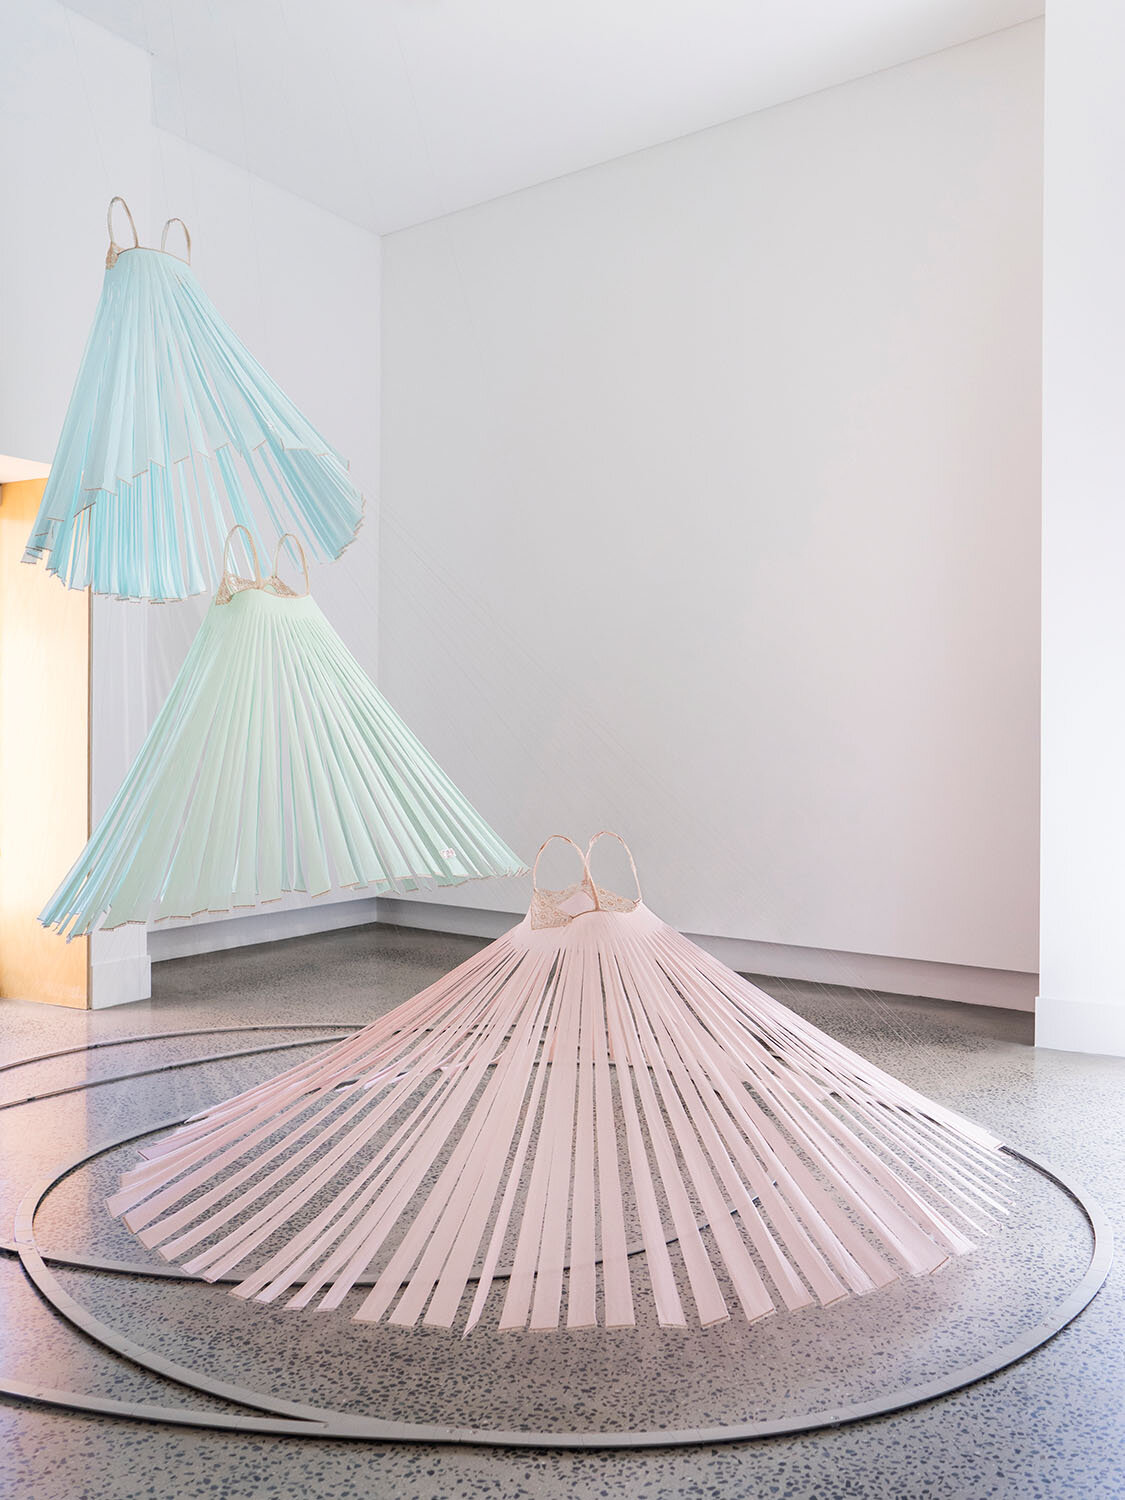   Ascension I (Angels) , 2019, found nighties, millinery wire, thread, magnets, steel, paint, 313 x 350 x 390cm 